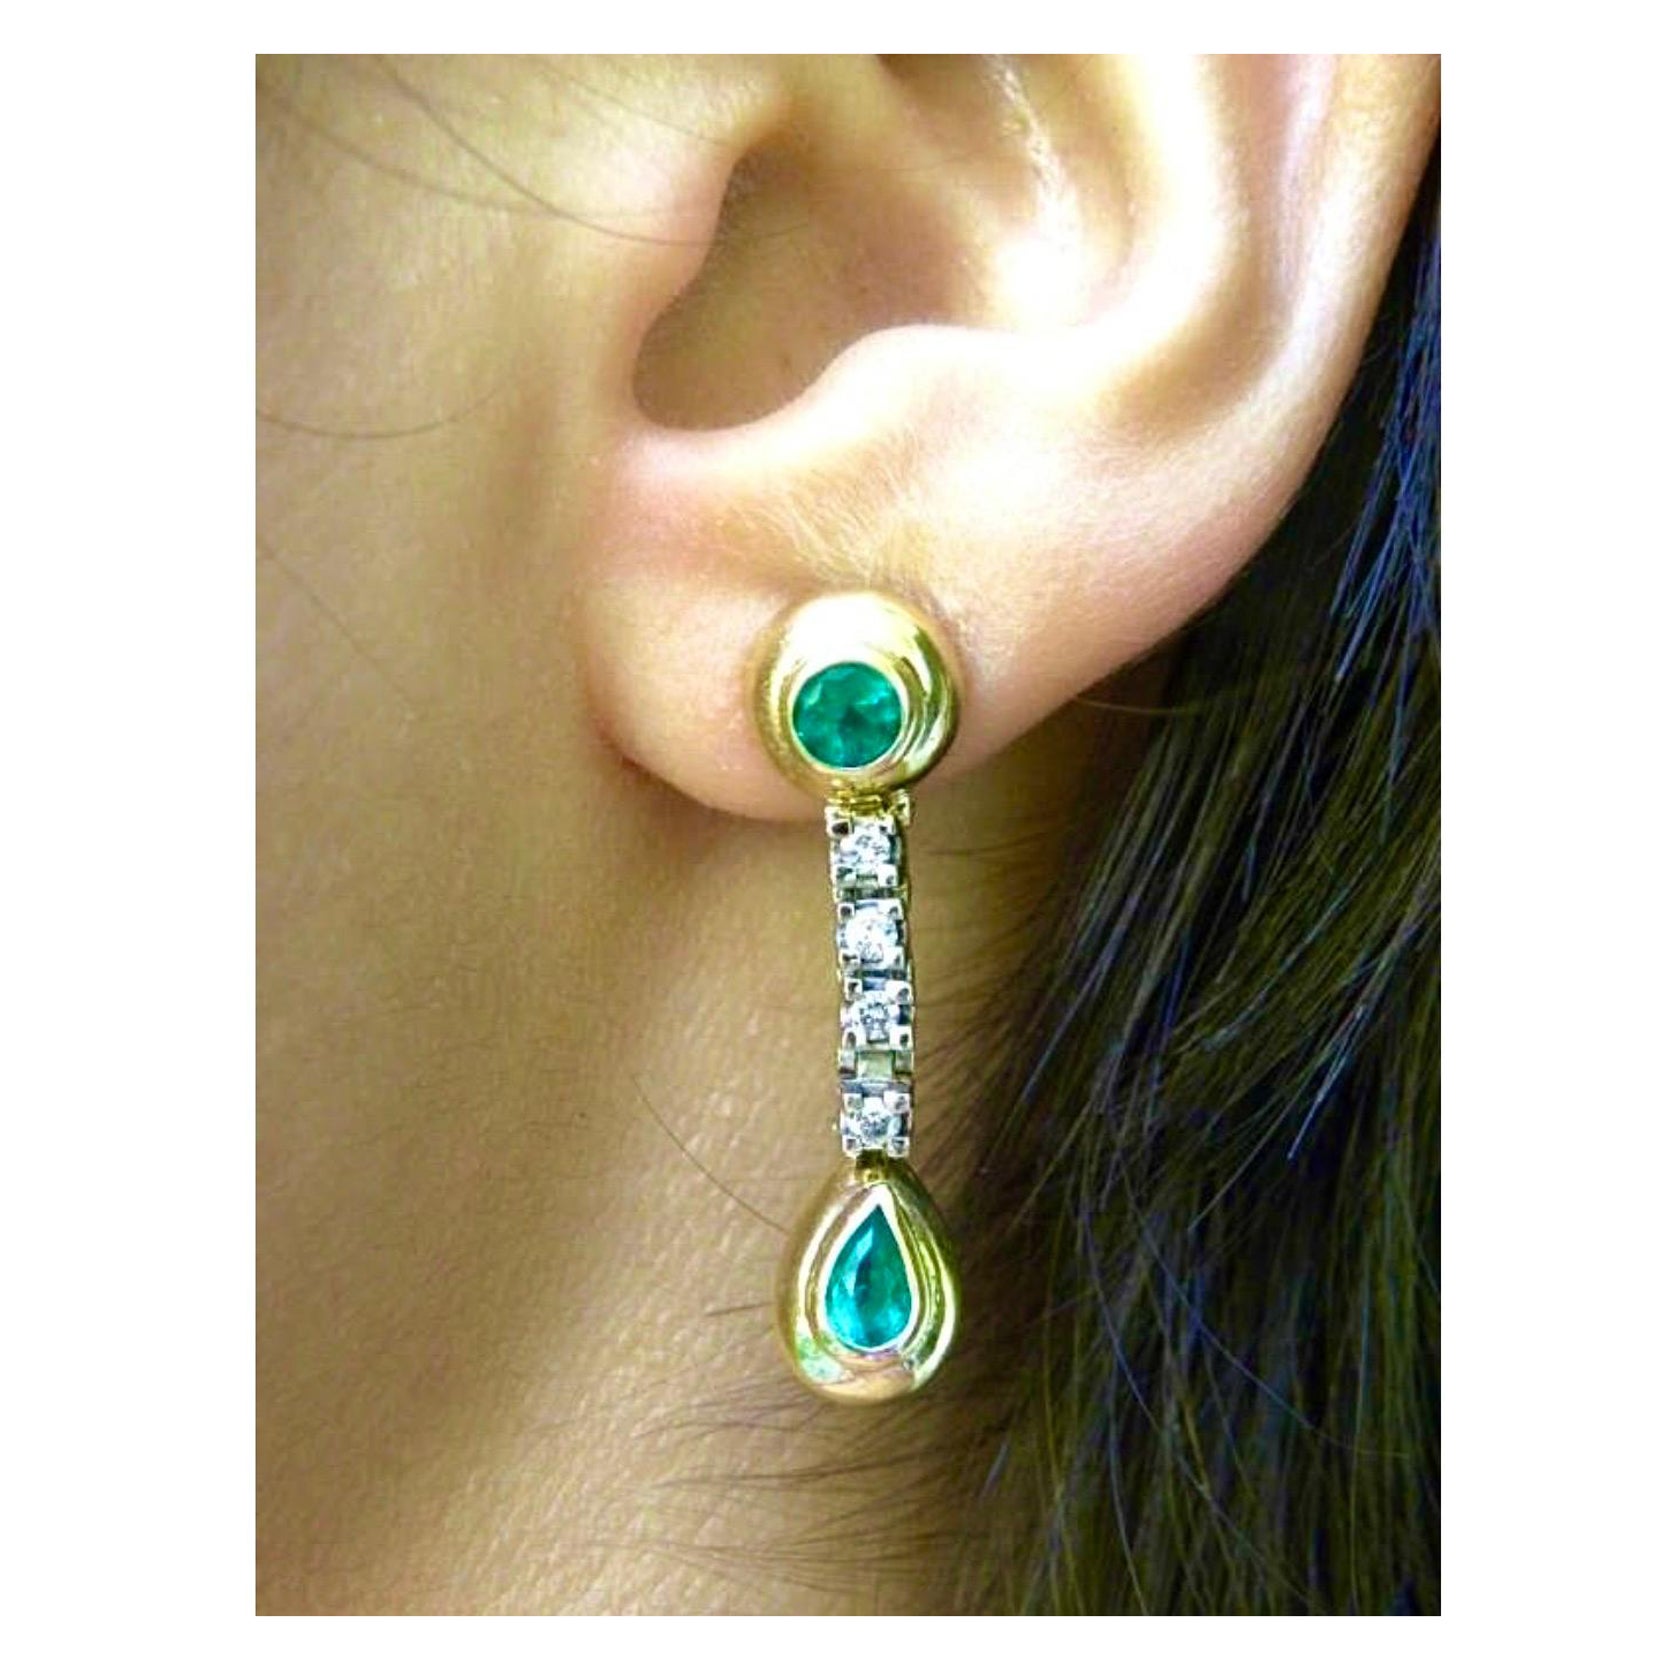 The Gorgeous two-tone gold Earrings
Feature 4 (2- round/2-pear shape)
Genuine and natural AAA Colombian emeralds 
that have an Intense Medium Green Color- VS. They are very Shimmering and clean. The 4 emeralds are bezel set in yellow gold 18K and 8